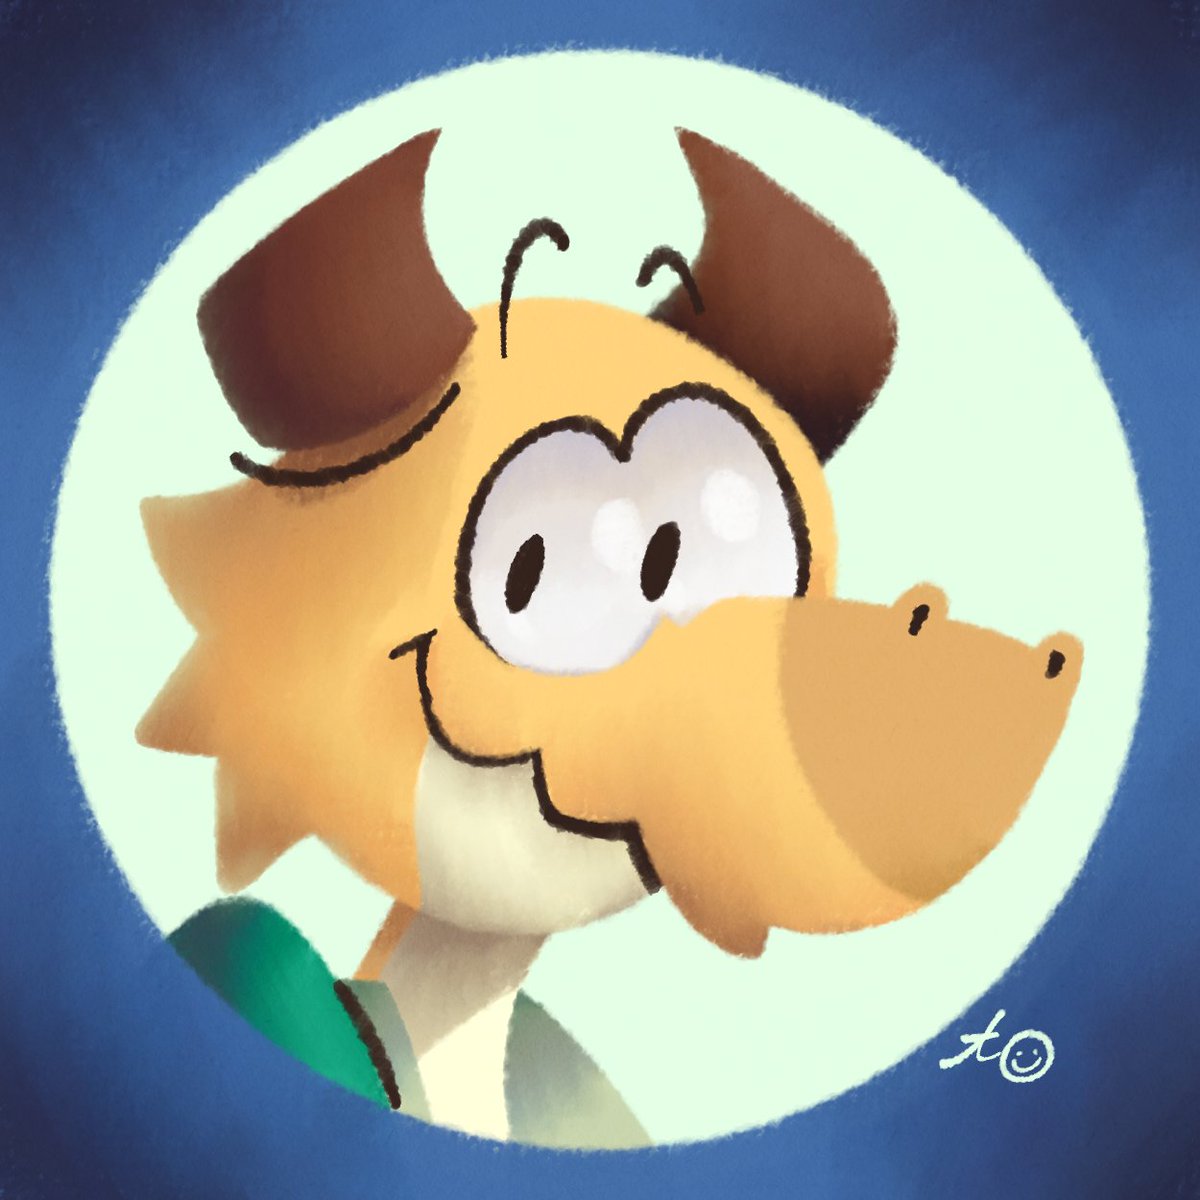 #FurryArt #DragonFurry #Cartoony #Toony 

Introducing my new Profile Picture, featuring the new design of yours truly! I'm quite proud of it!